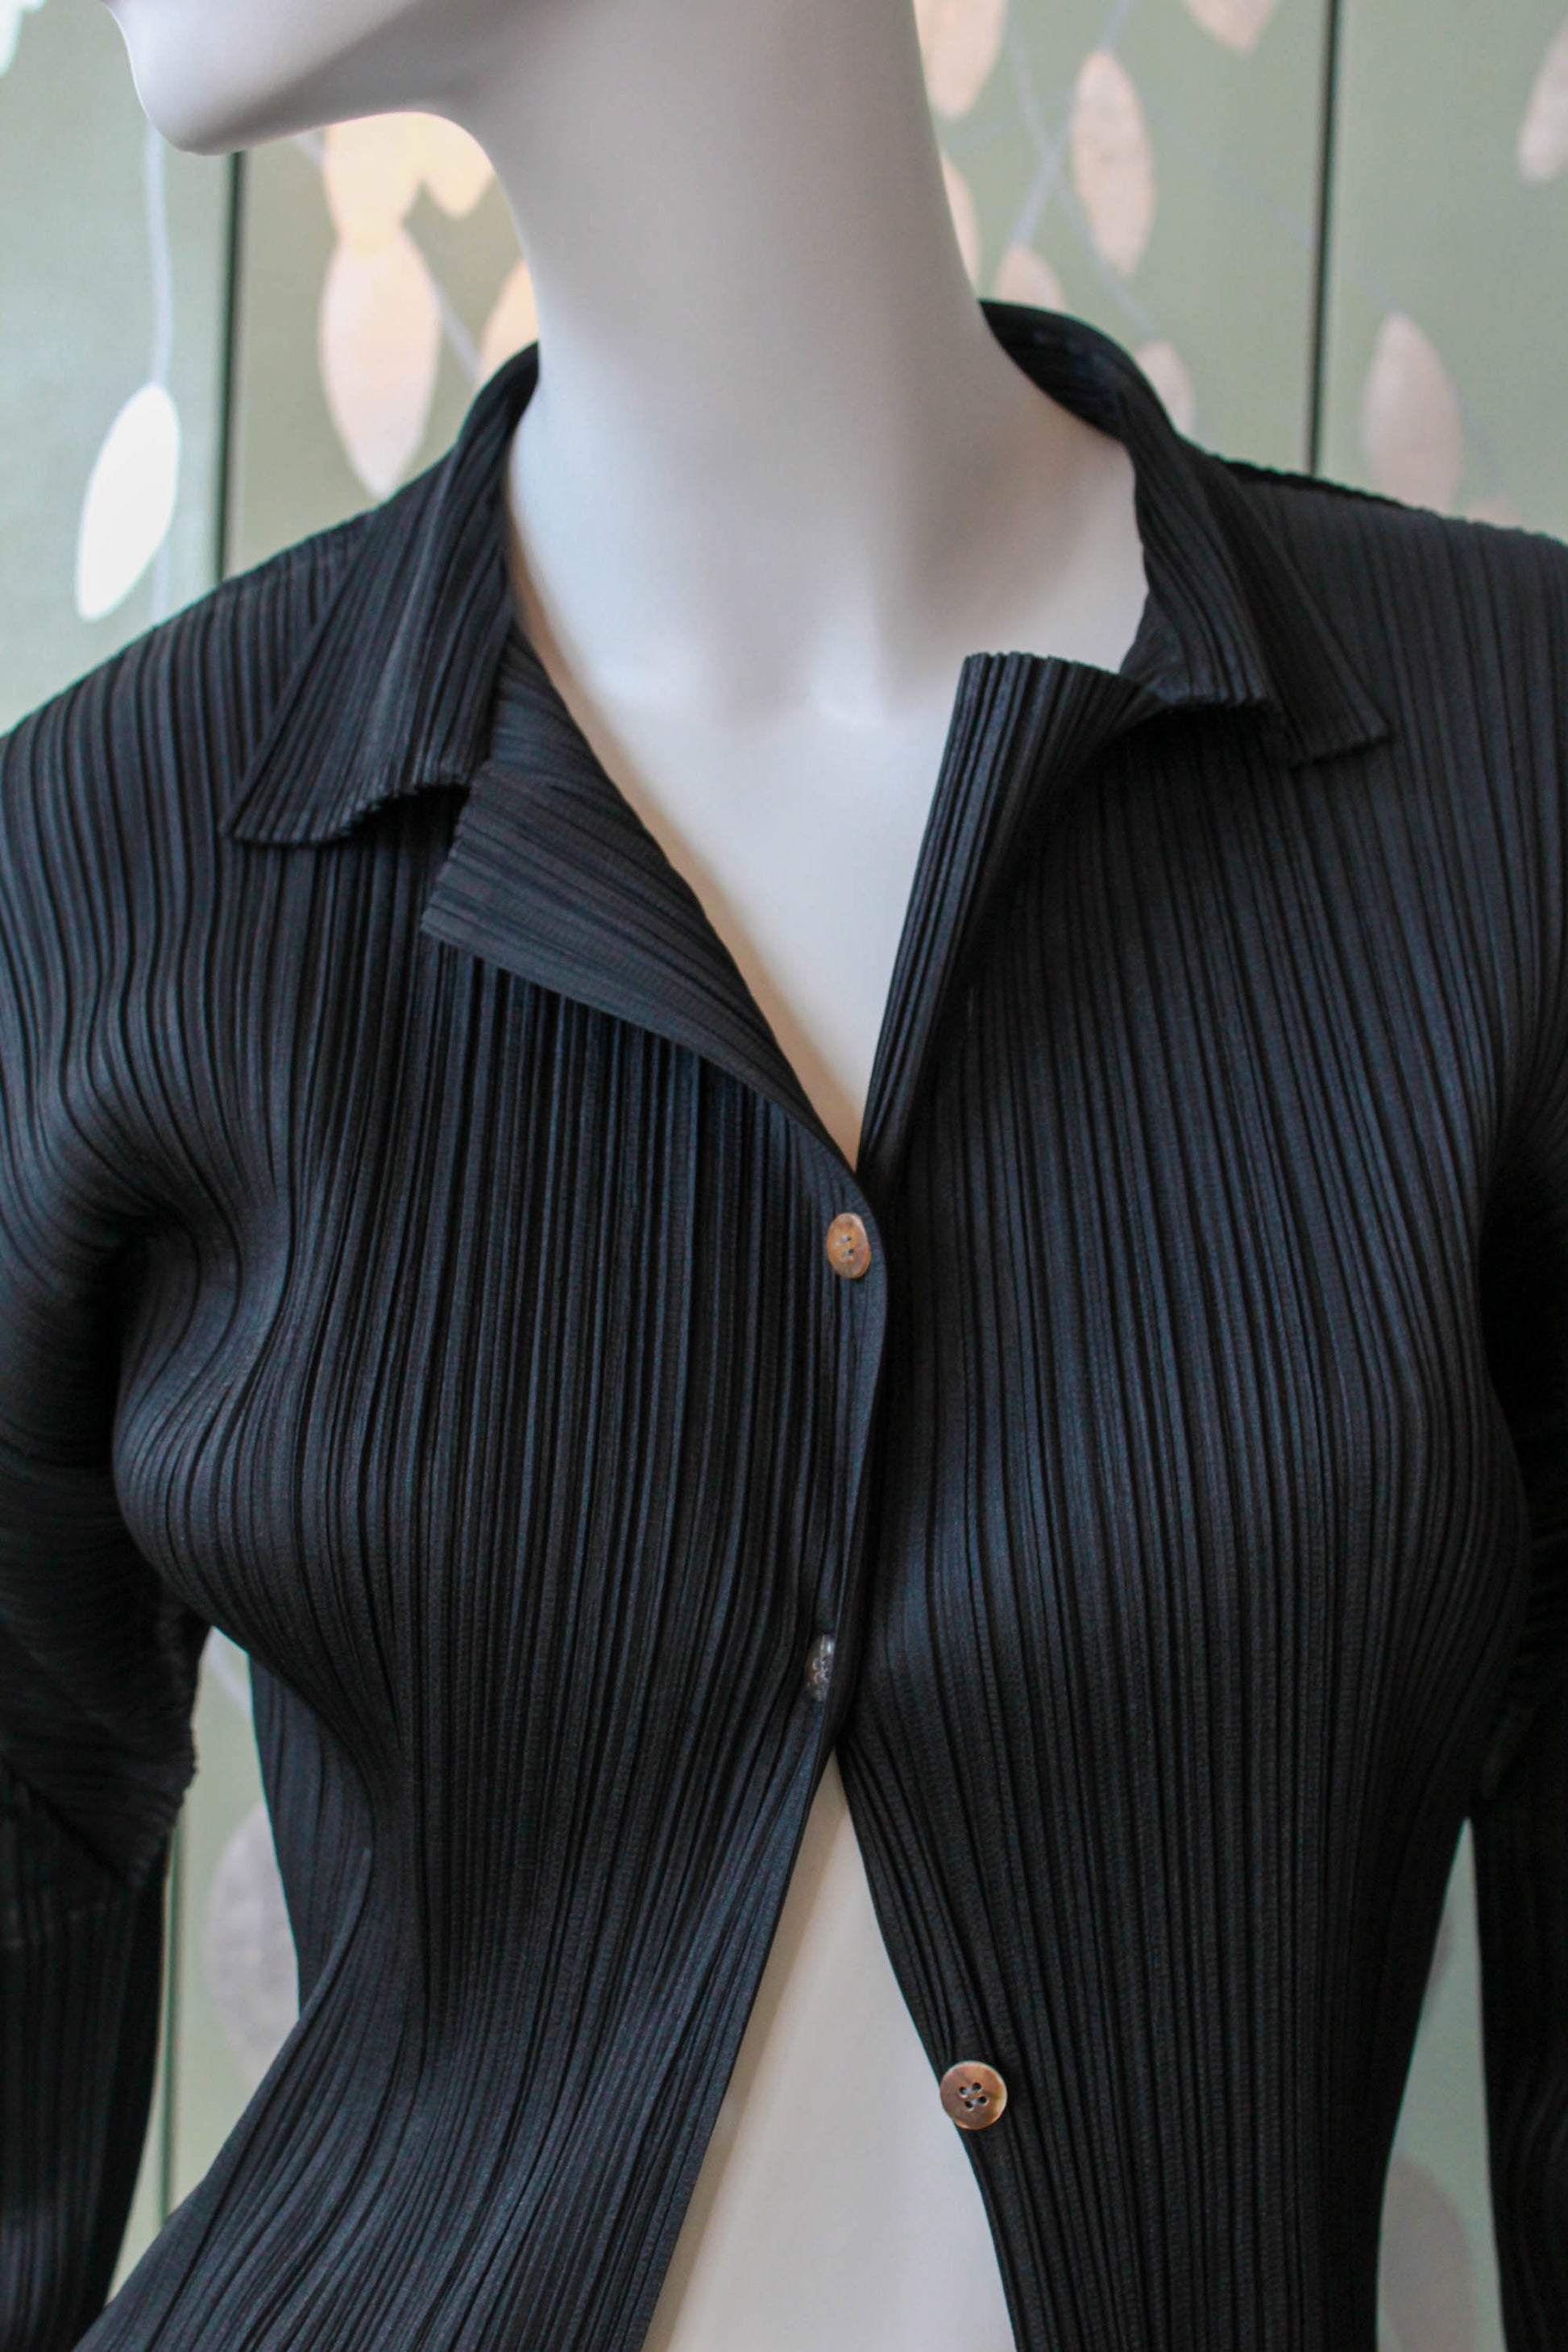 y2k early 2000s issey miyake pleats please button up shirt black with angled and pointed, structurally seamed shoulders, vintage designer clothing